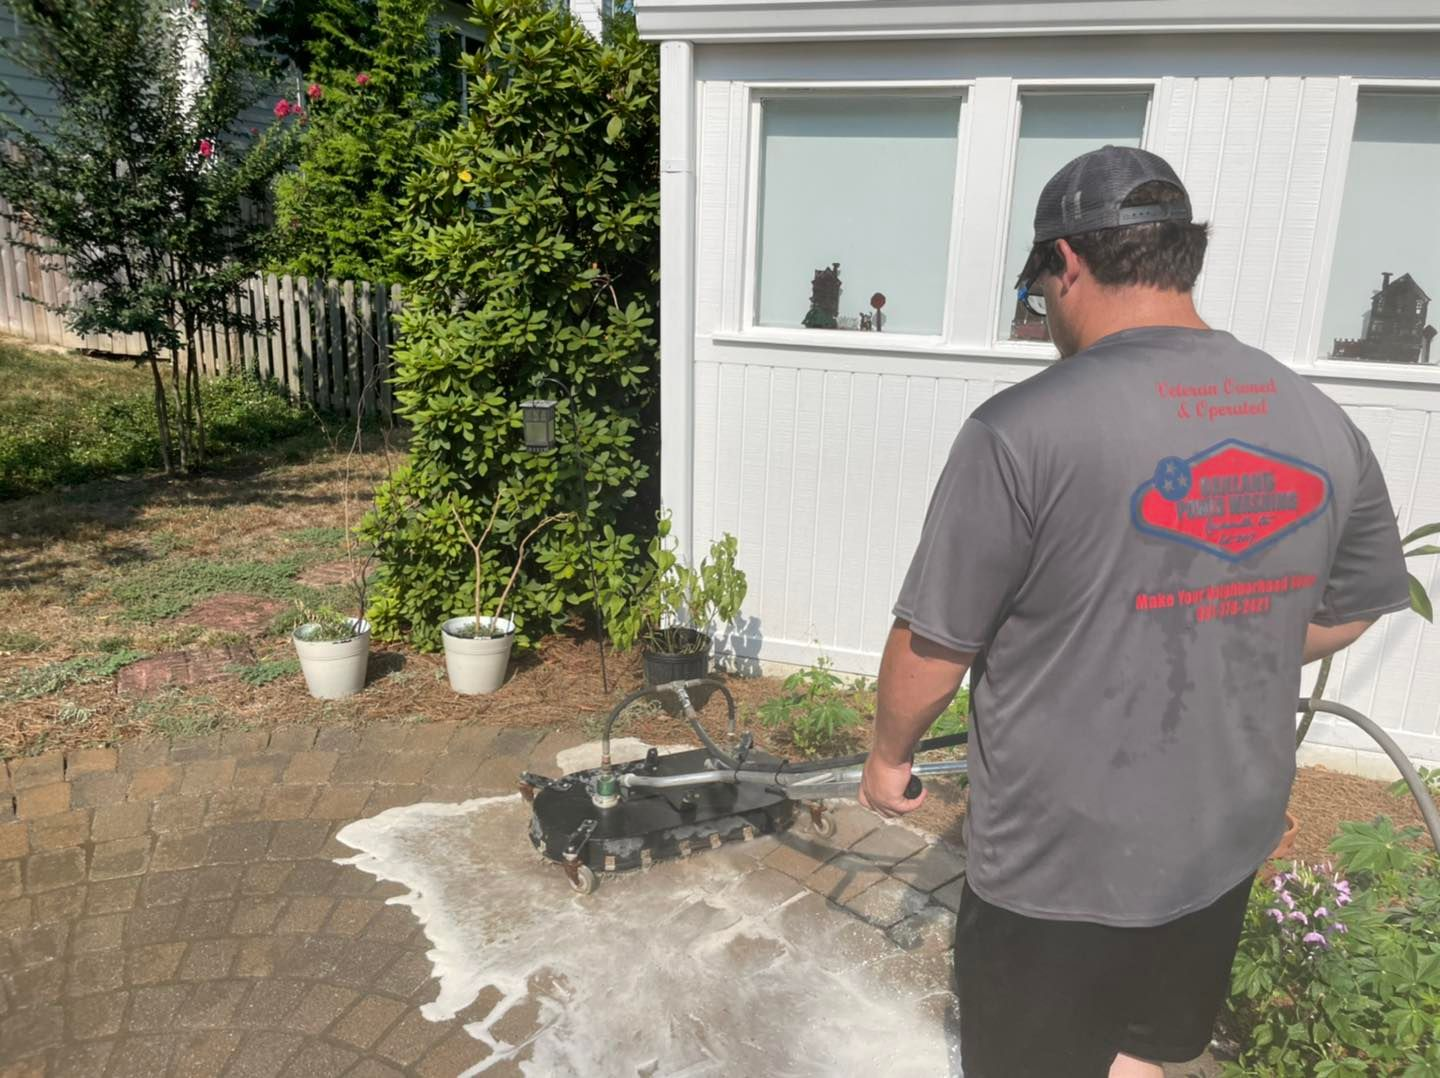 Paver stone patio Cleaning for Oakland Power Washing in Clarksville, TN